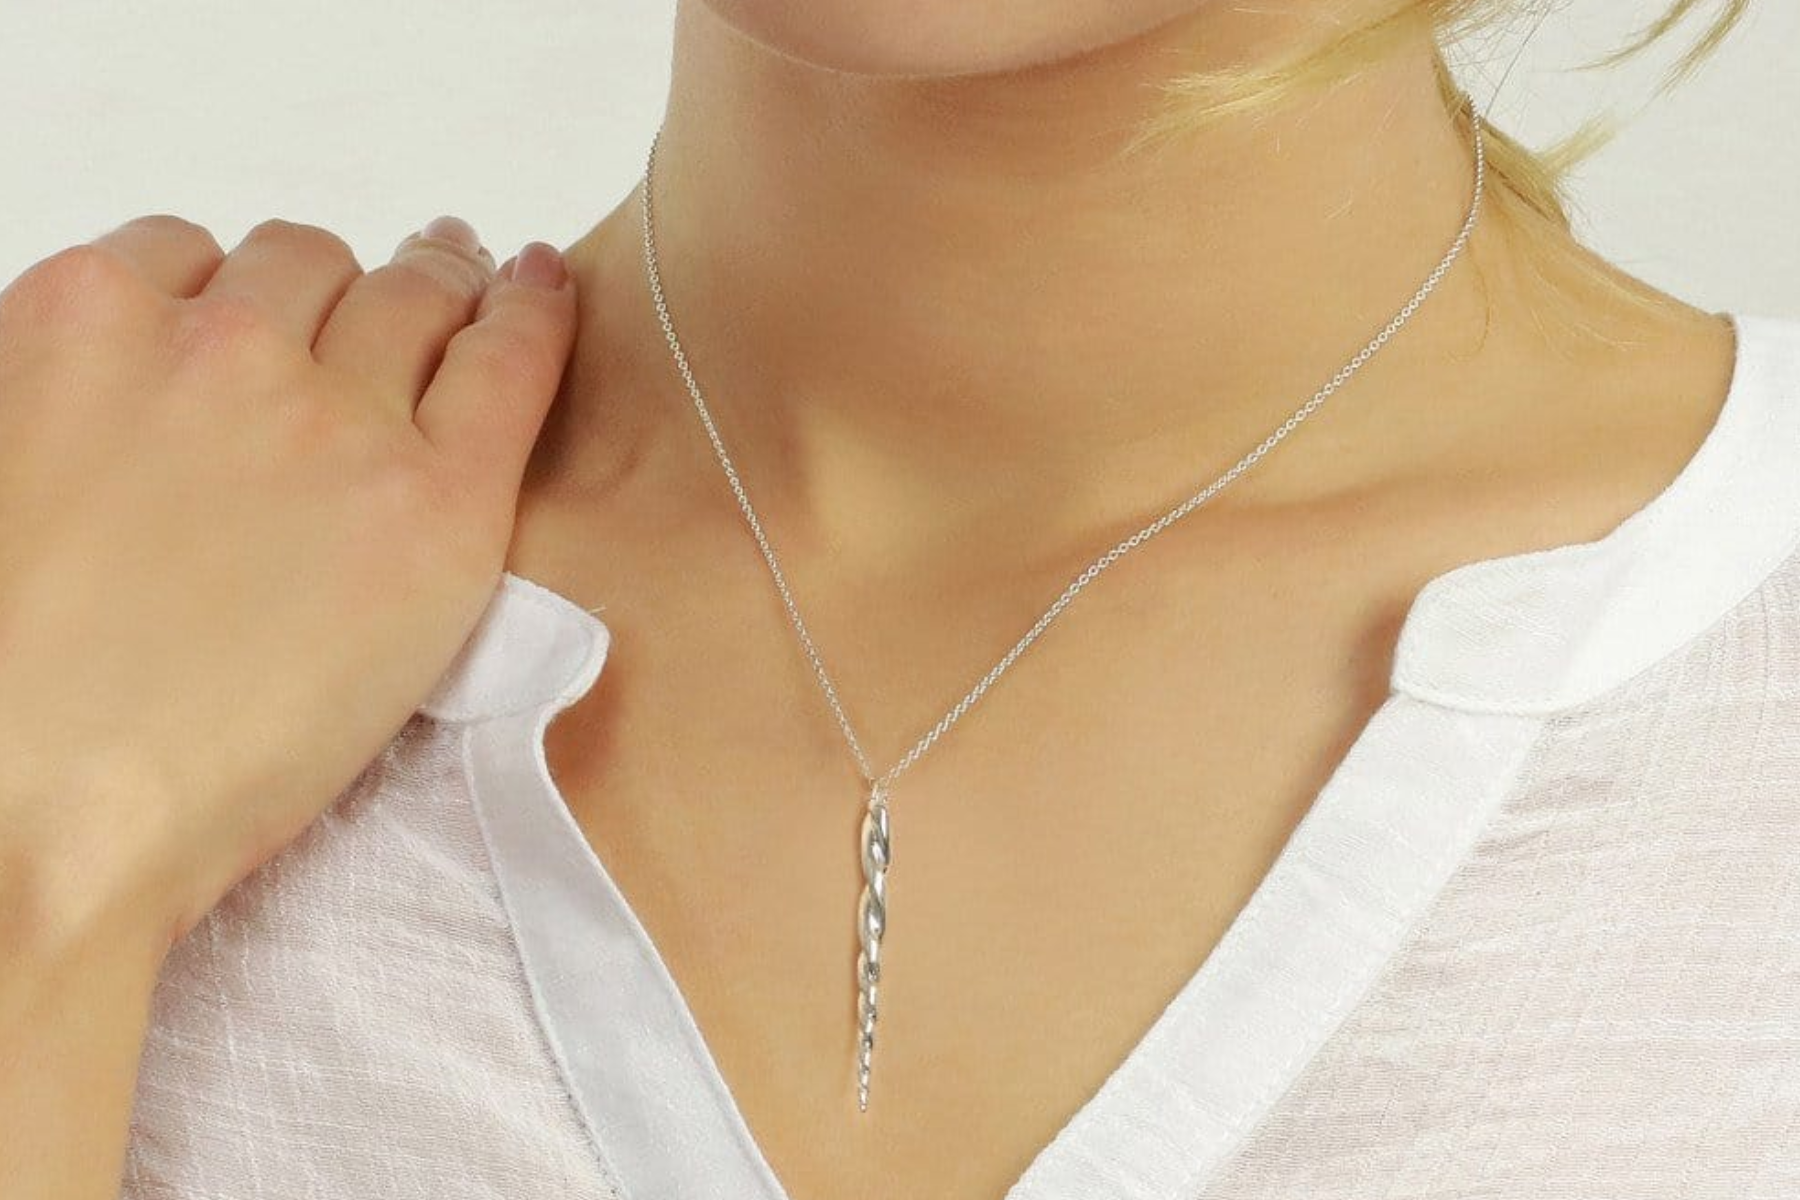 Unicorn Horn Necklaces For Girls - Turning Horn Into A Necklace